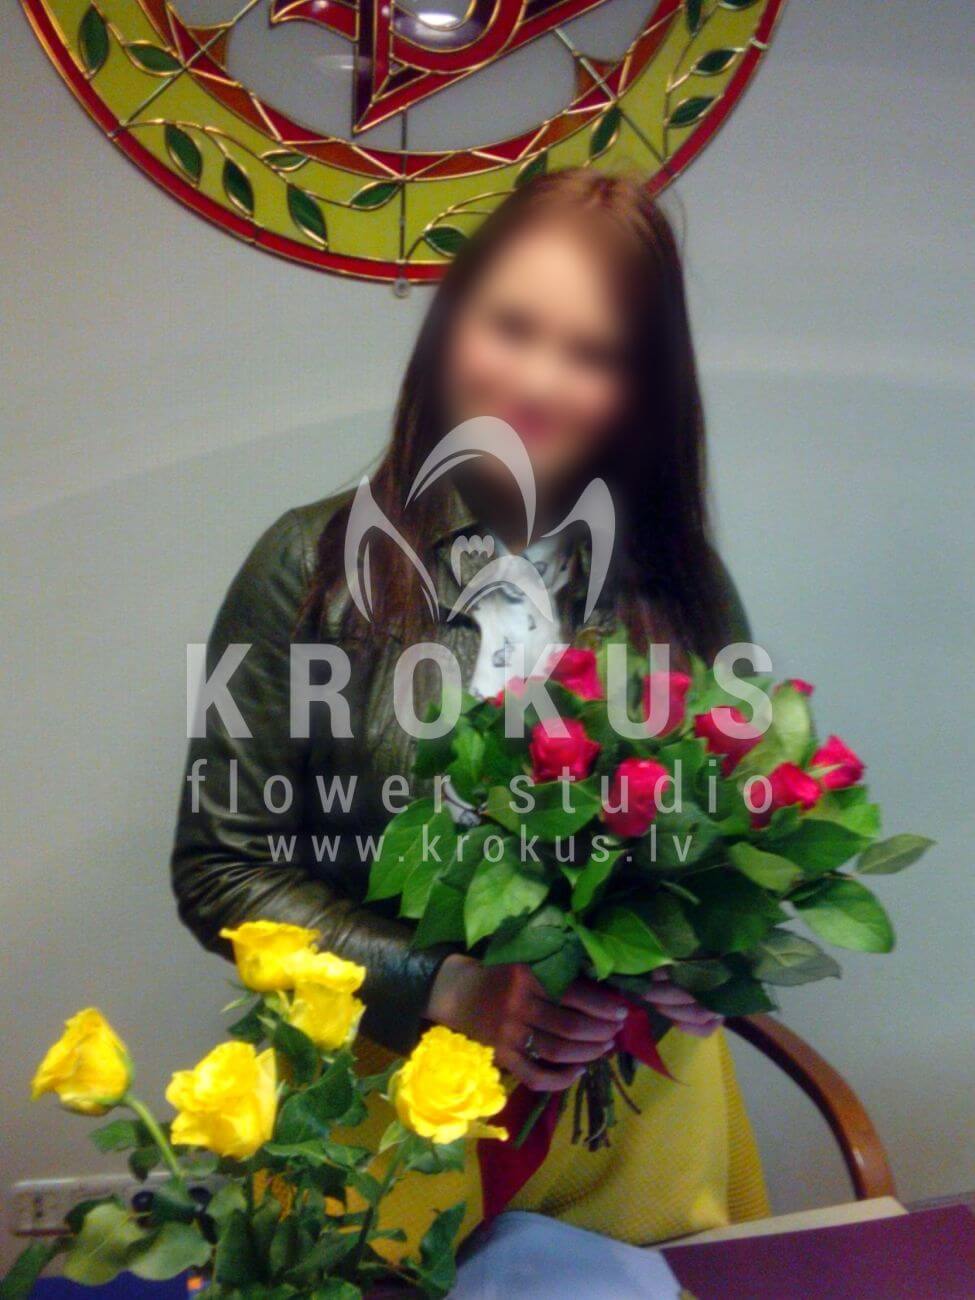 Deliver flowers to Latvia ()